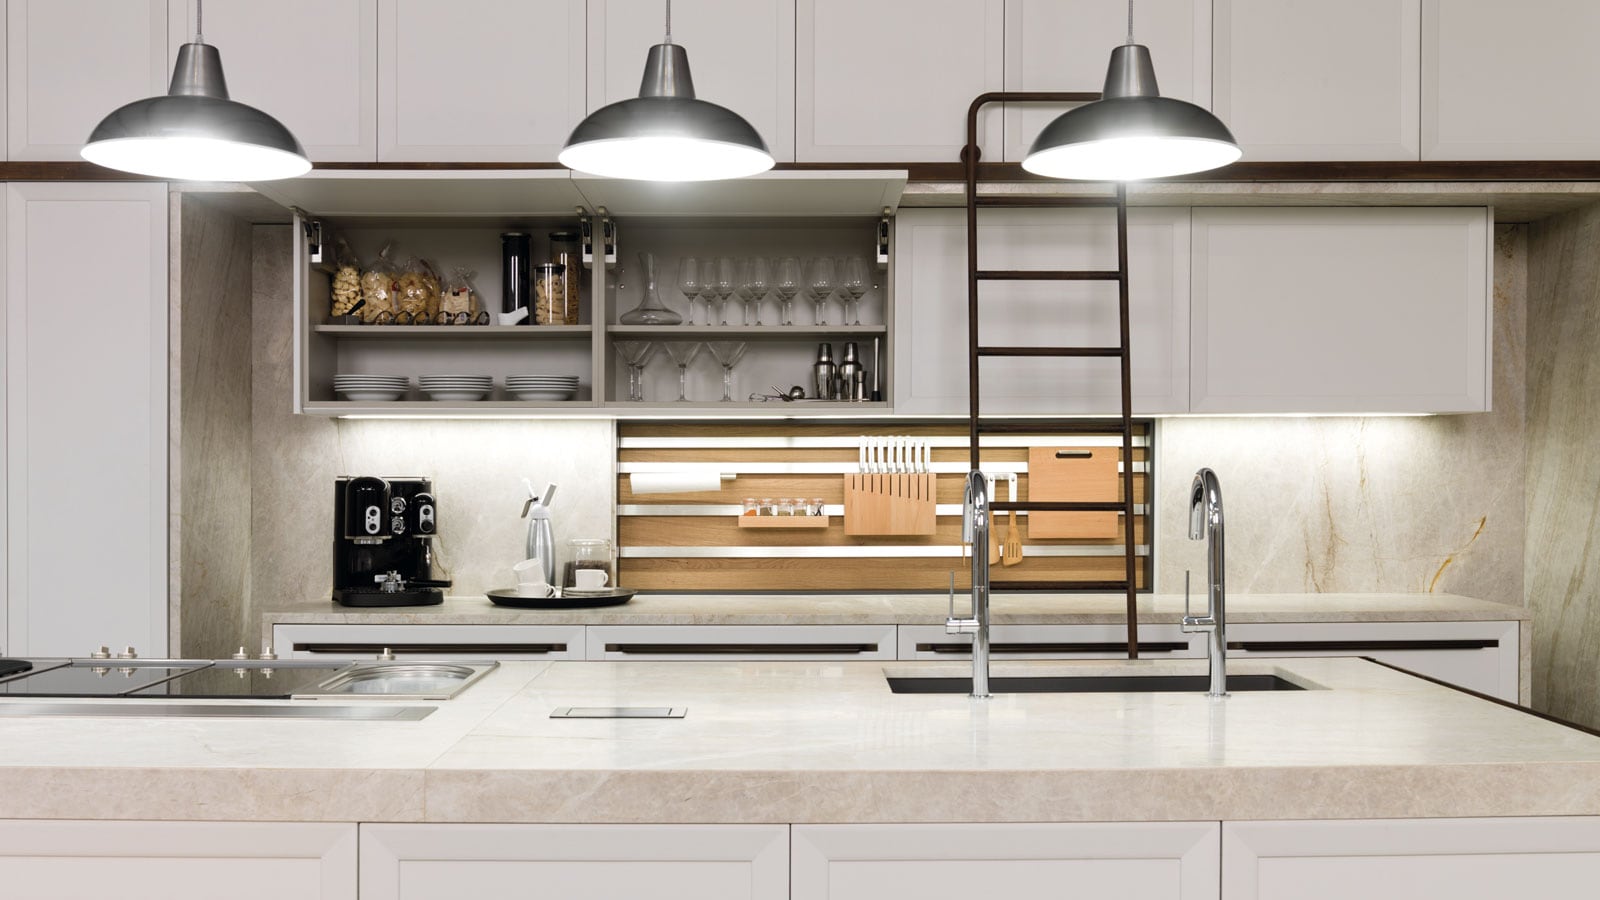 Practical ideas for organising kitchen cabinets